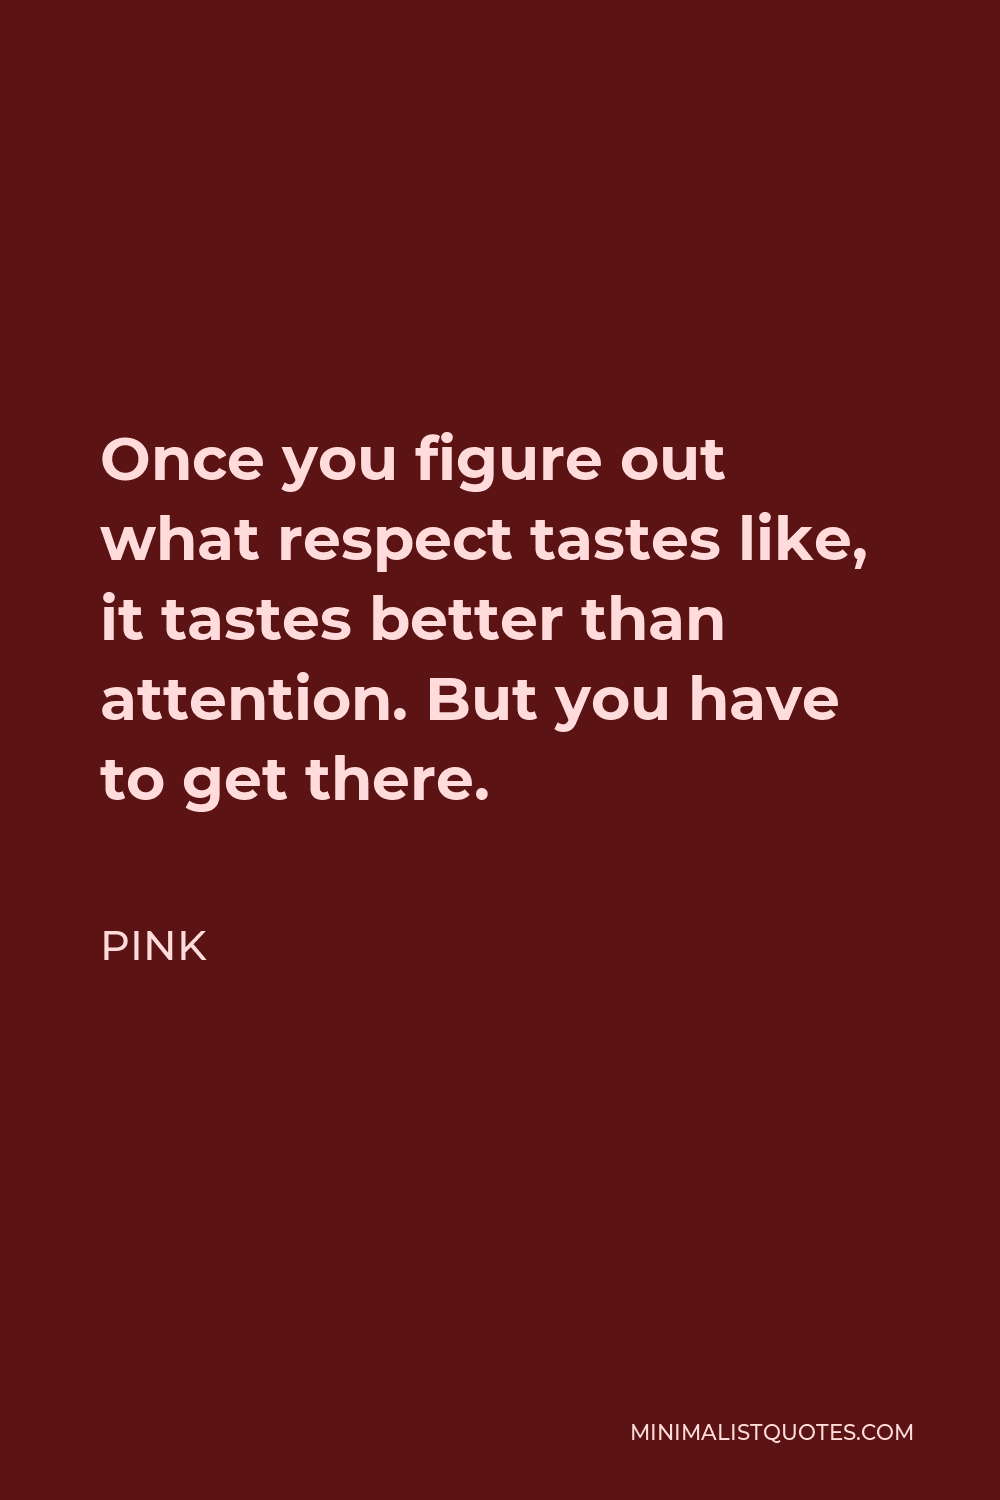 Pink Quote - Once you figure out what respect tastes like, it tastes better than attention. But you have to get there.